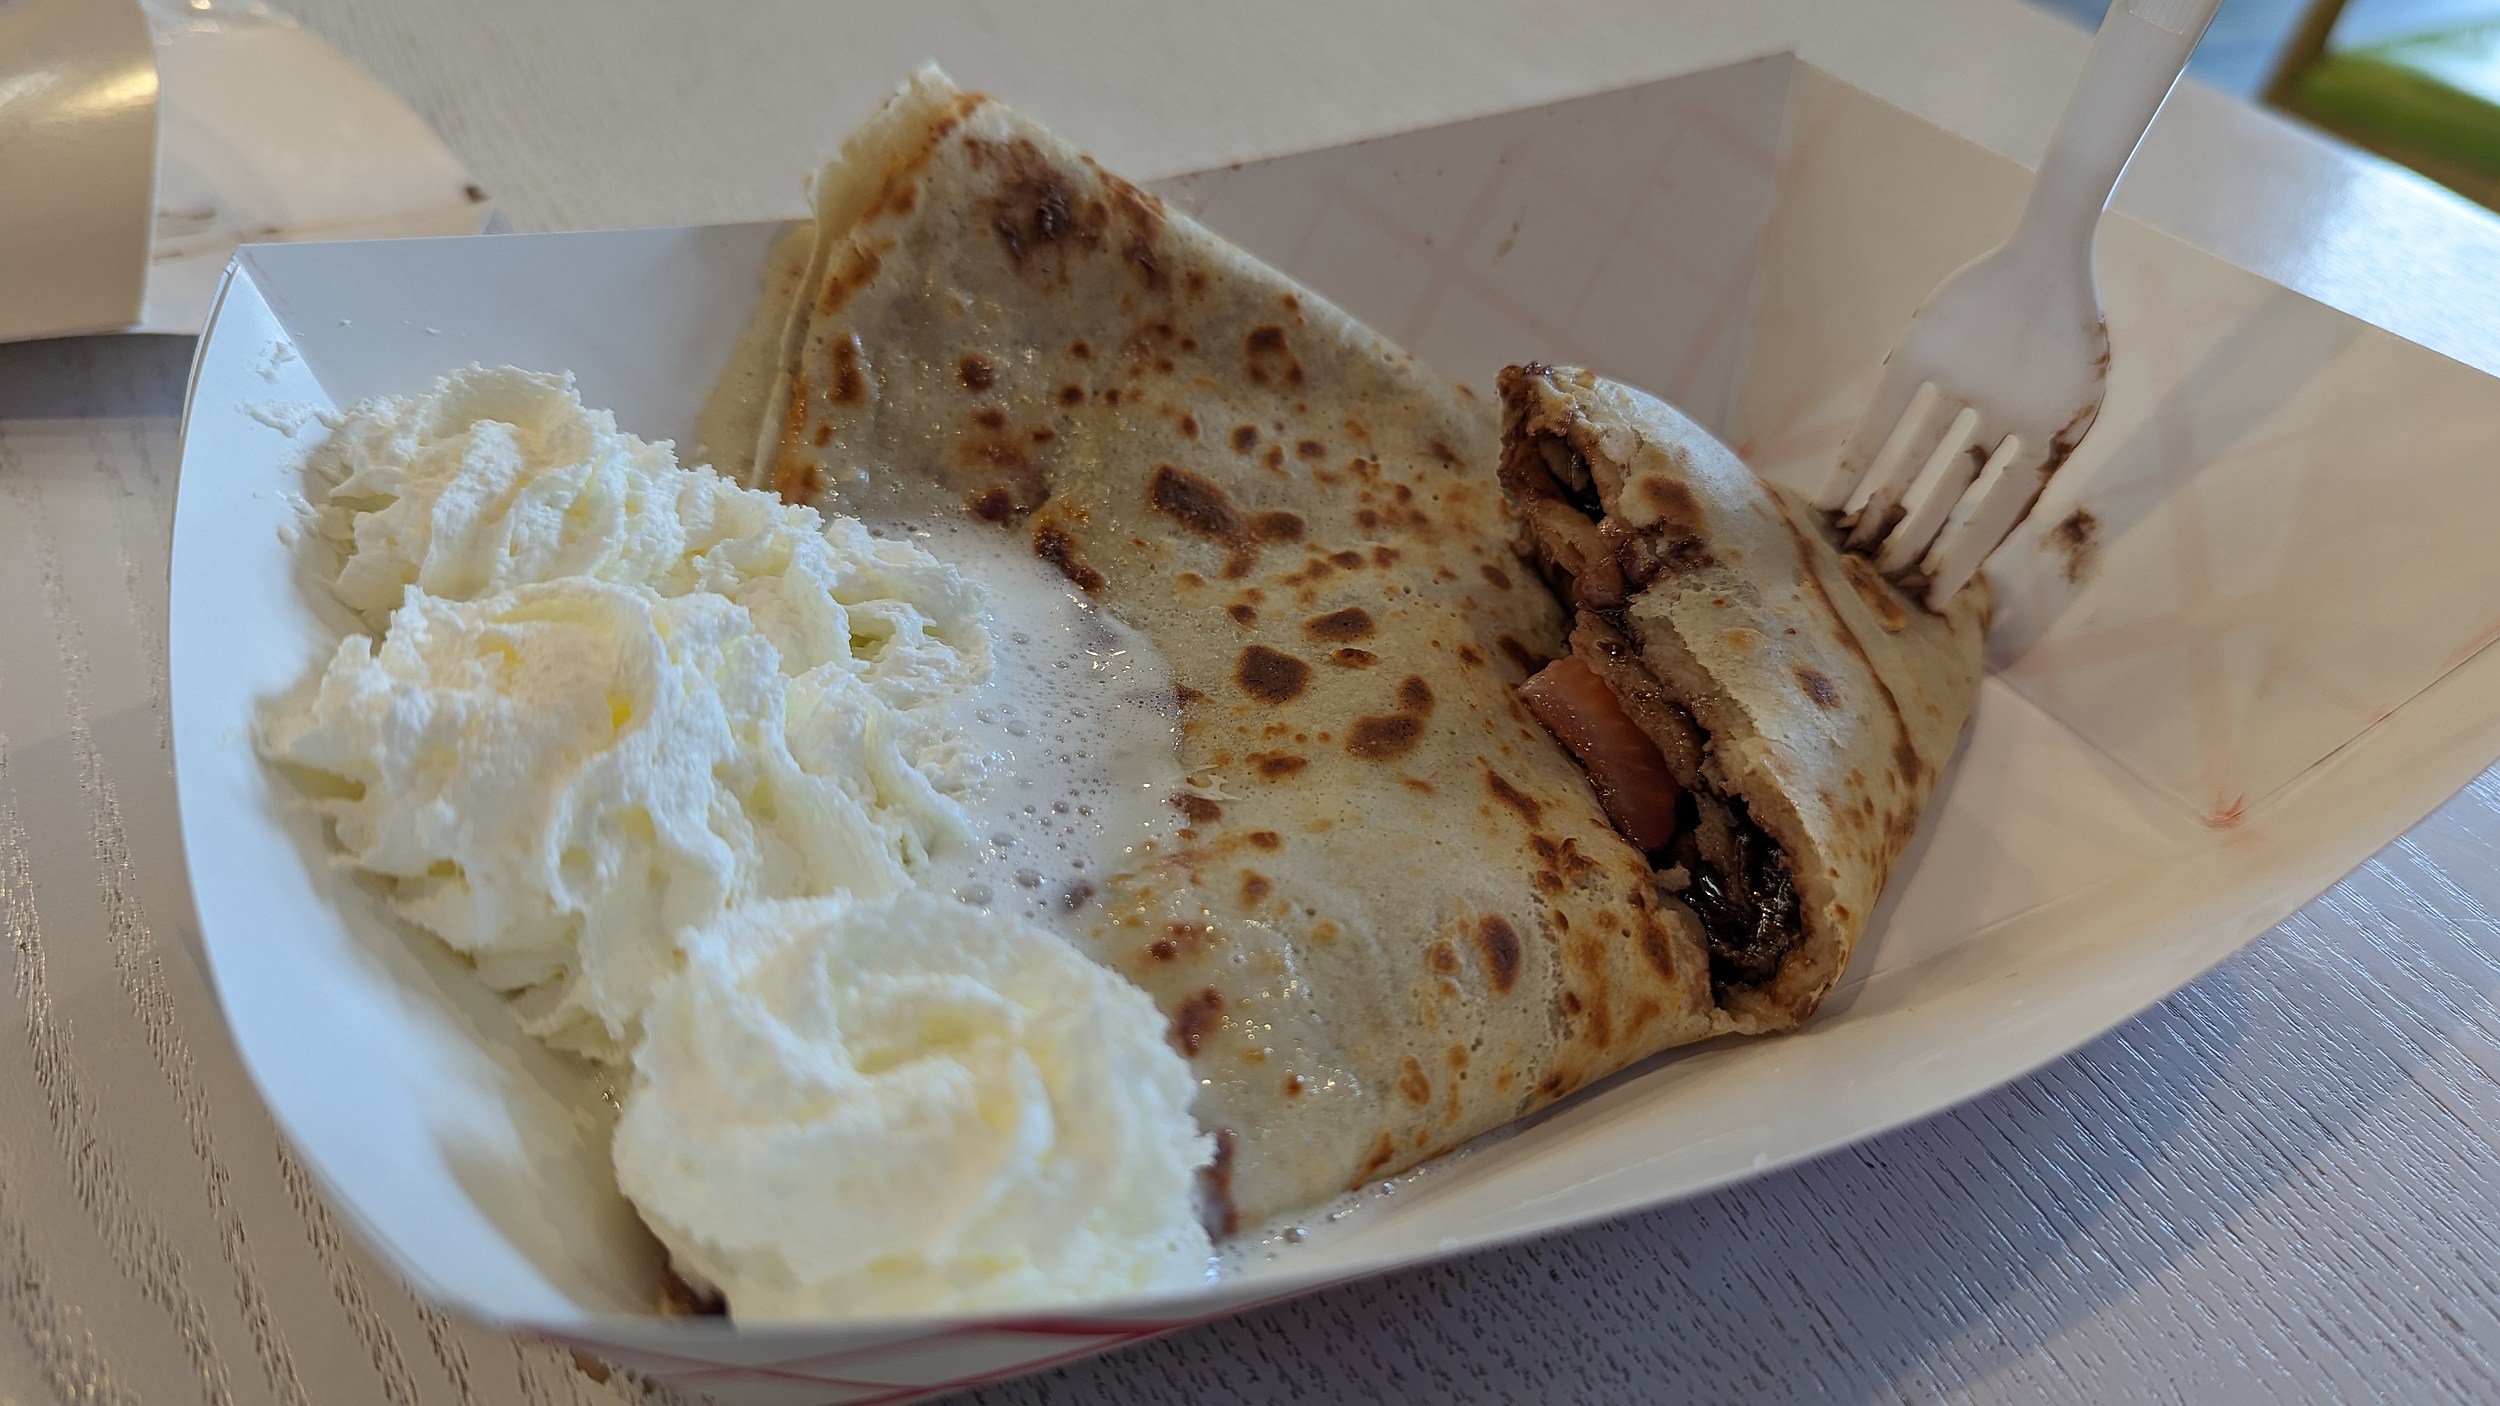 Yakima has a New Place for Crepes that Youve Gotta photo